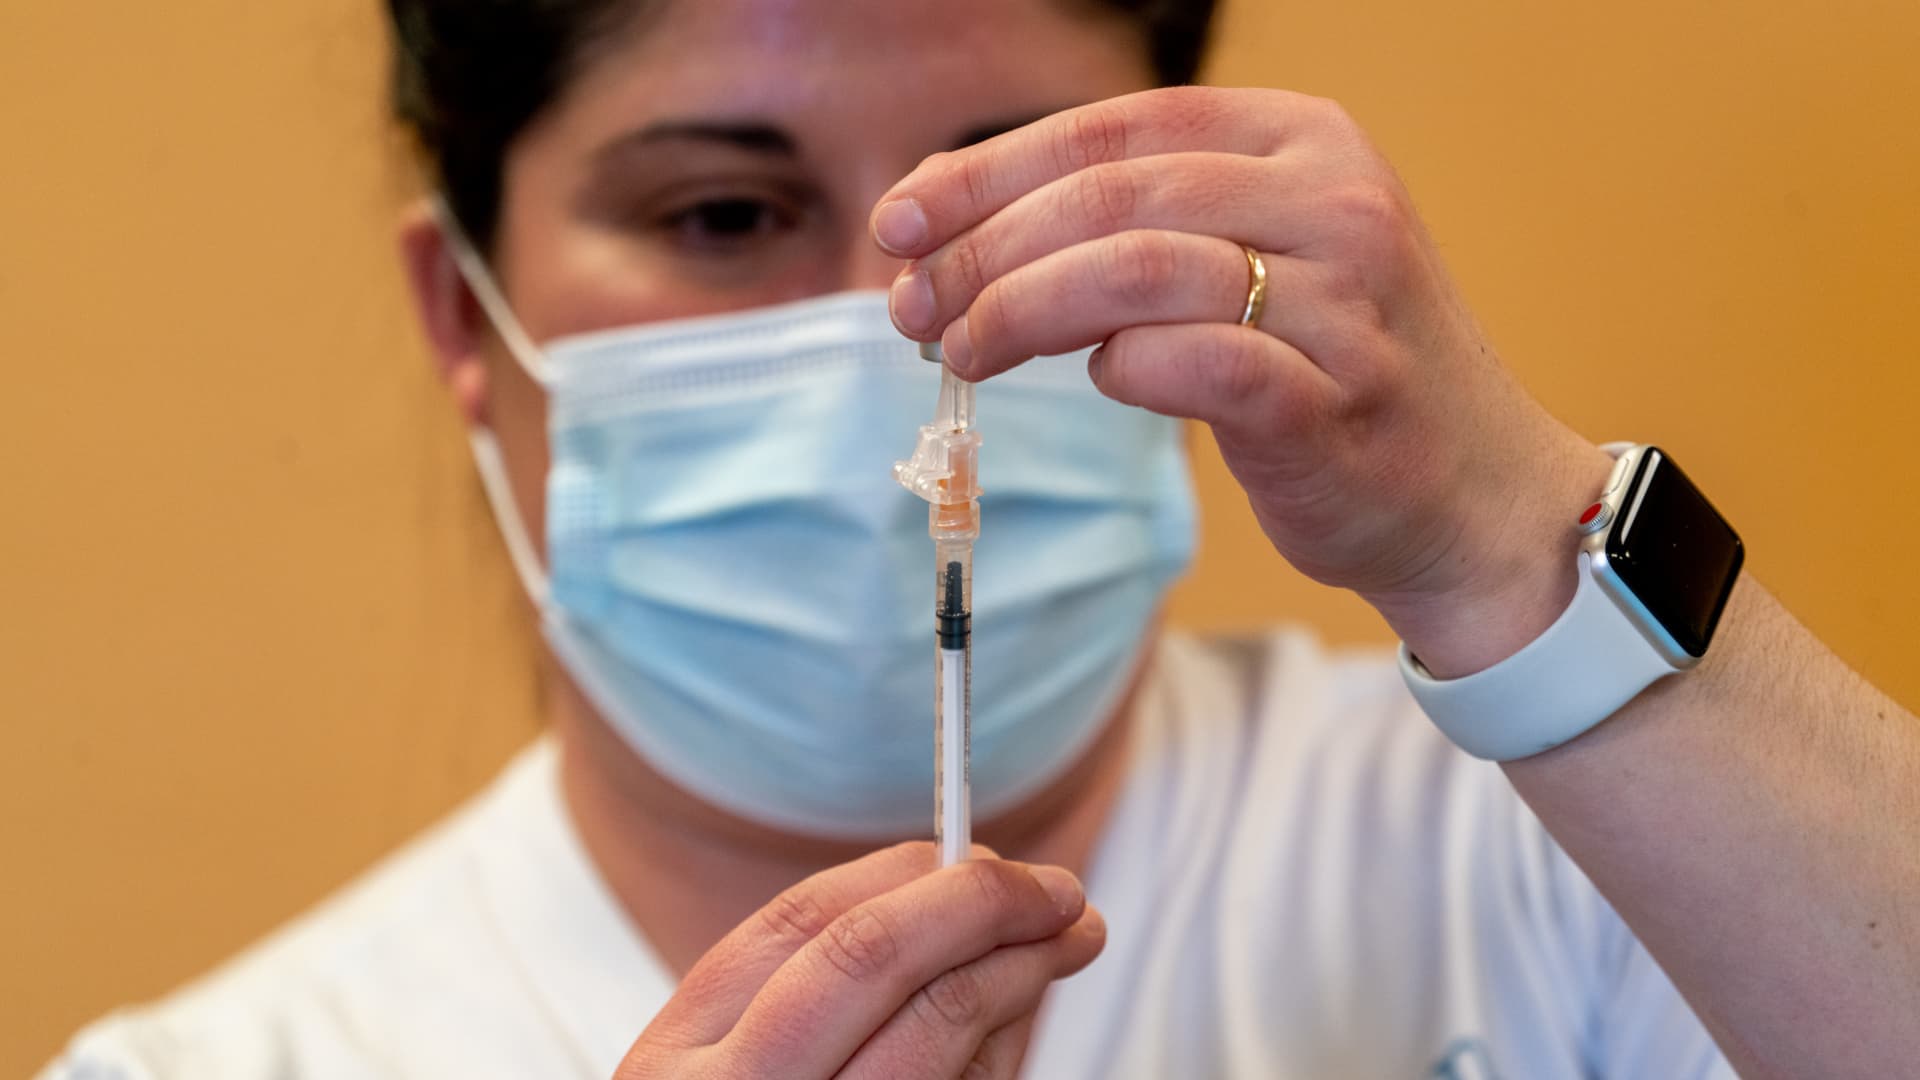 Here’s why Covid vaccines will still be free for uninsured Americans as public health emergency ends